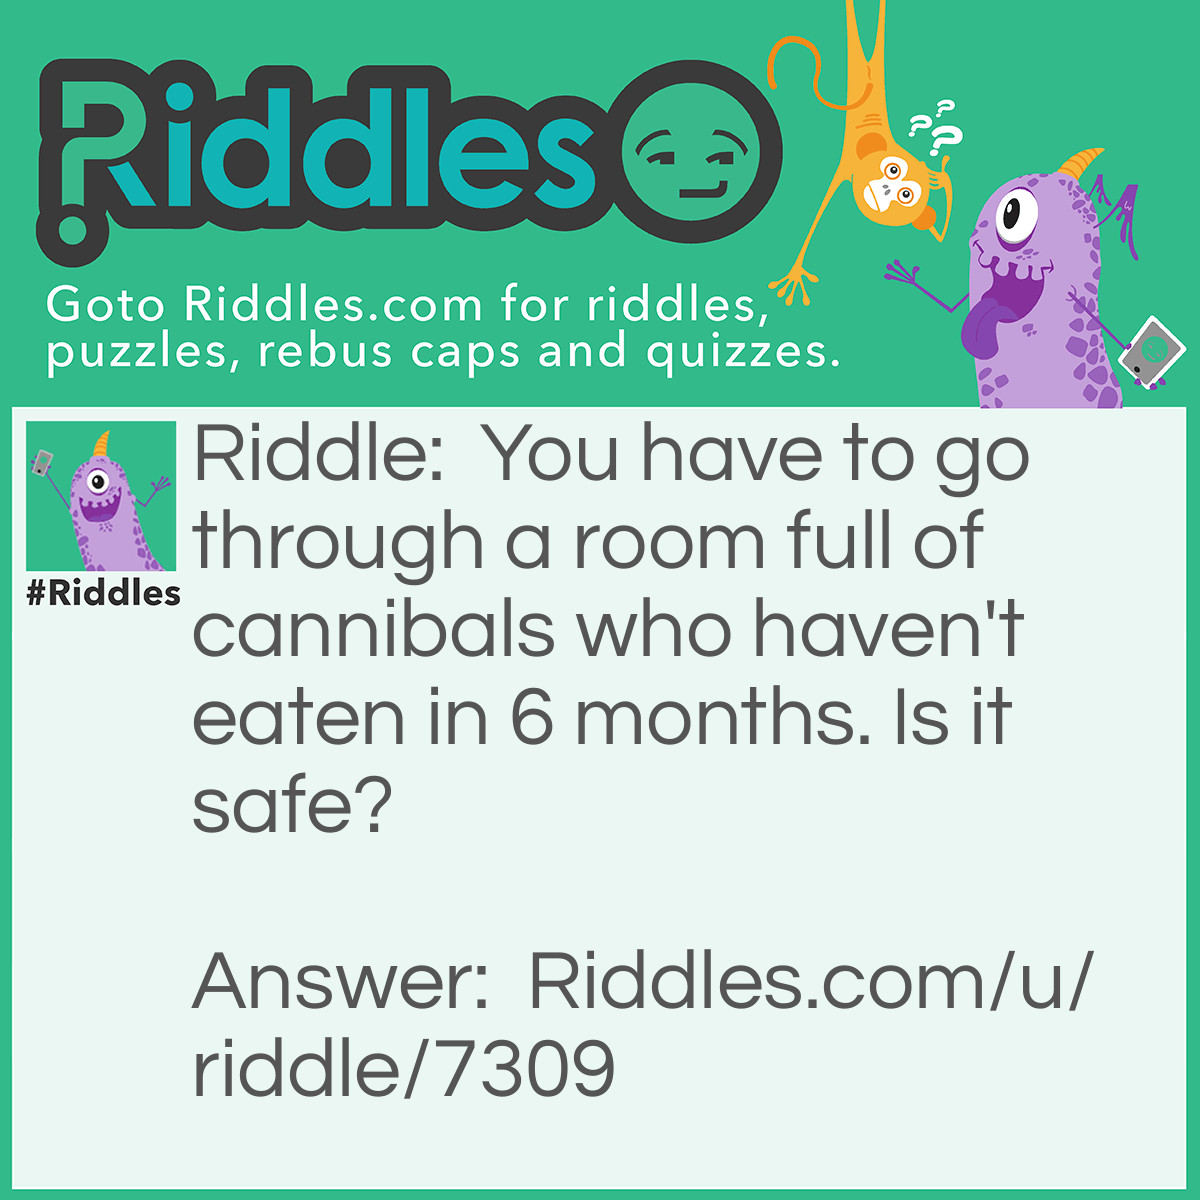 Riddle: You have to go through a room full of cannibals who haven't eaten in 6 months. Is it safe? Answer: Yes, it's safe because they're dead. Duh.